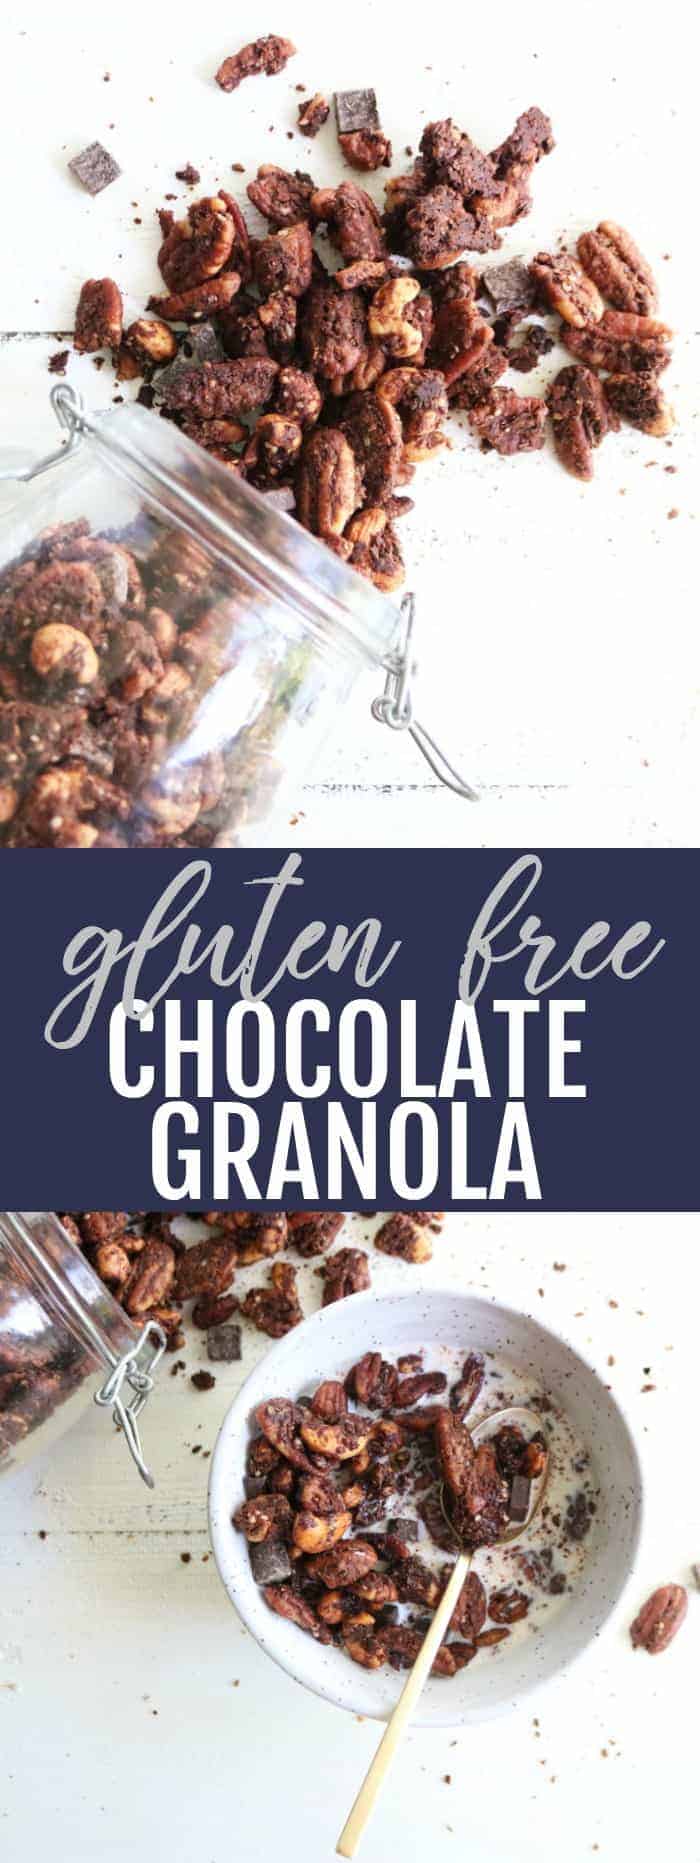 Easy and delicious recipe for homemade Gluten Free Double Chocolate Granola that is packed with protein and healthy fats but feels super indulgent! thetoastedpinenut.com